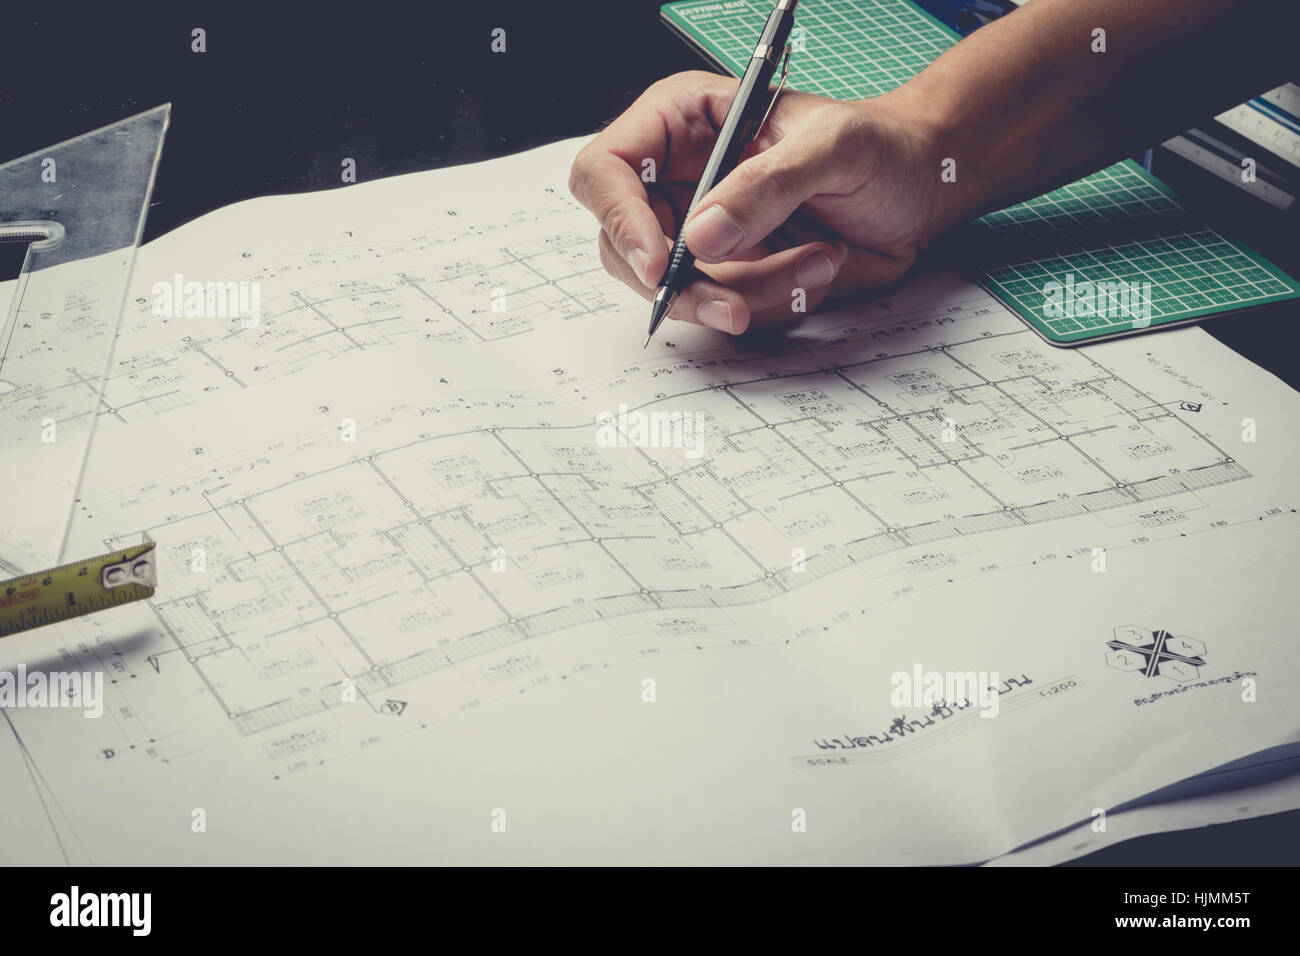 engineering diagram blueprint paper drafting project sketch architectural,selective focus,vintage filter. Stock Photo